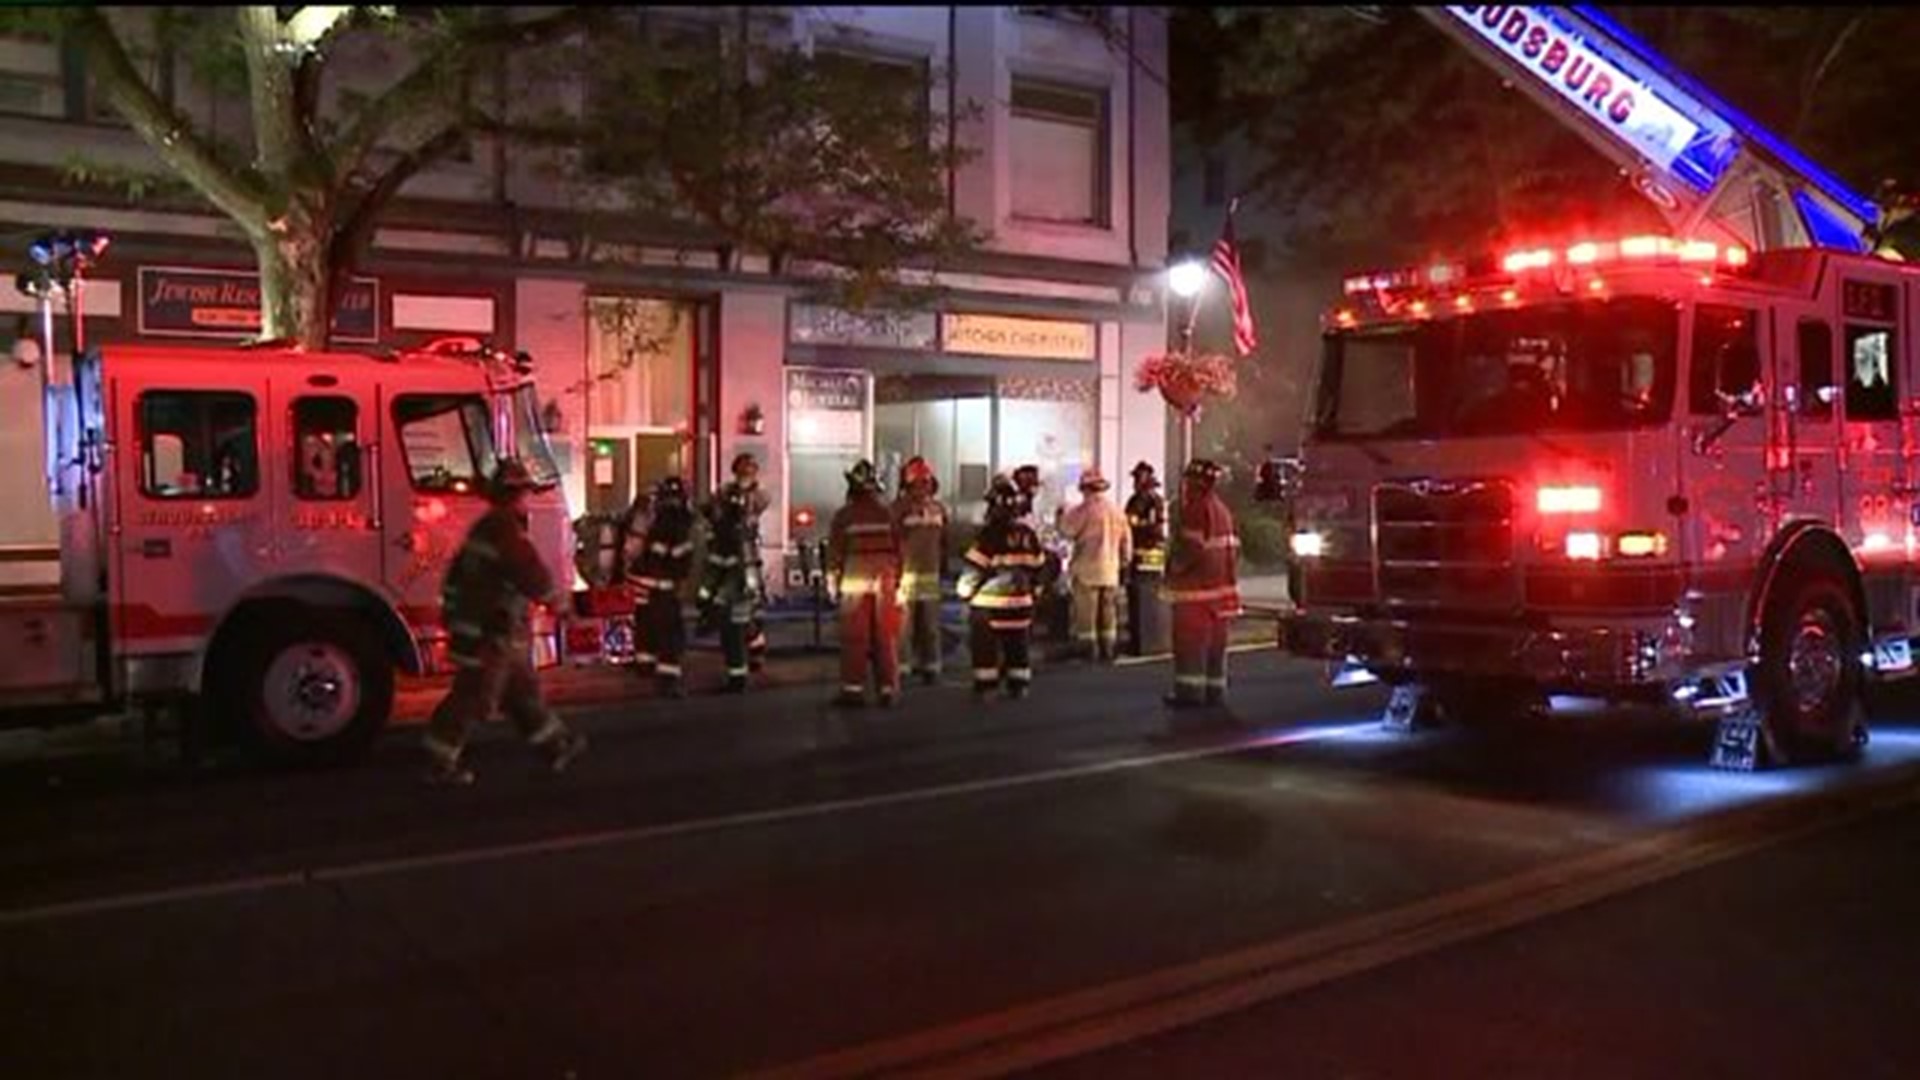 Cleanup Continues After Downtown Fire In Stroudsburg